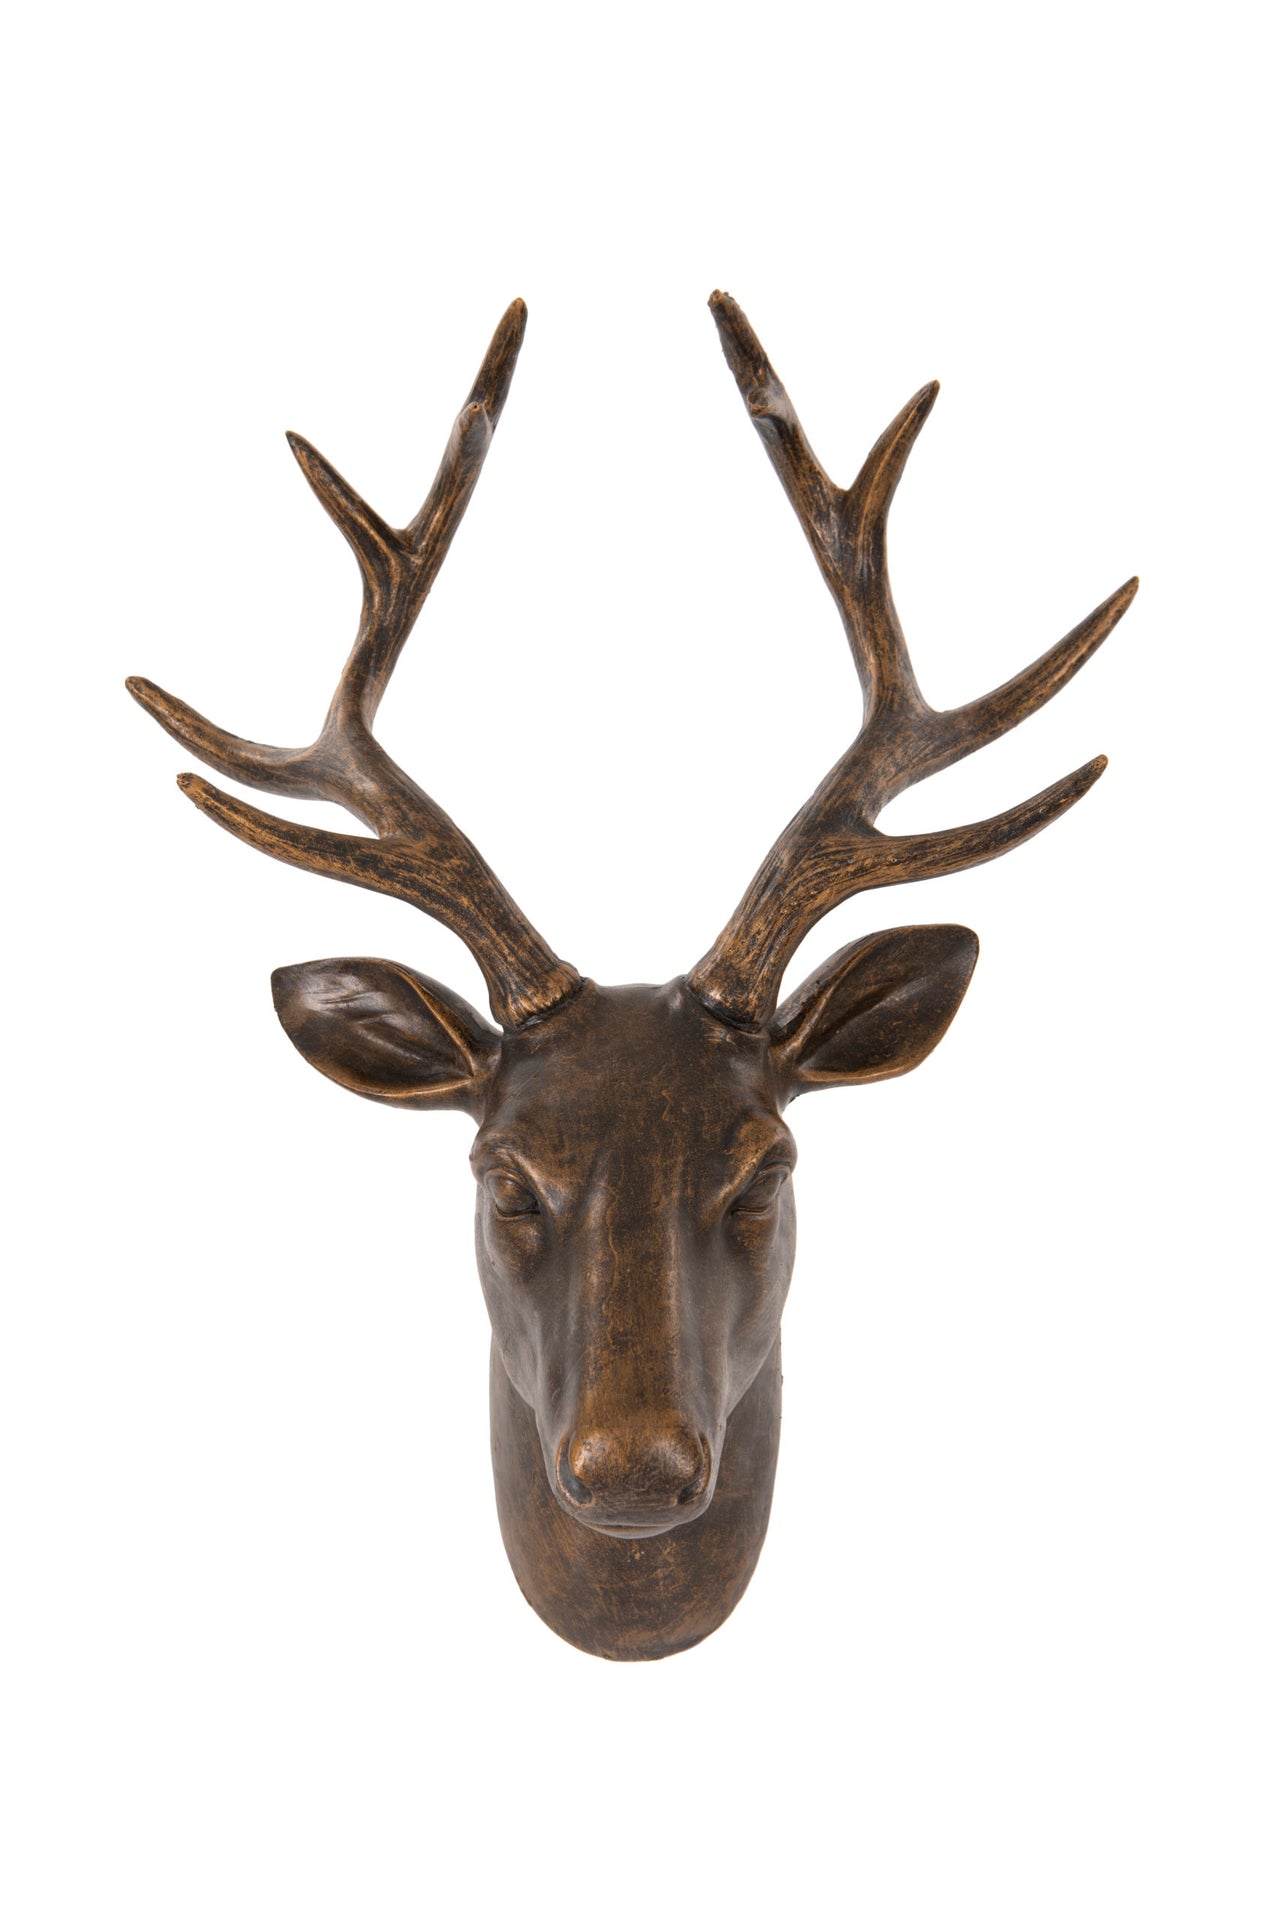 London Ornaments Stag Head